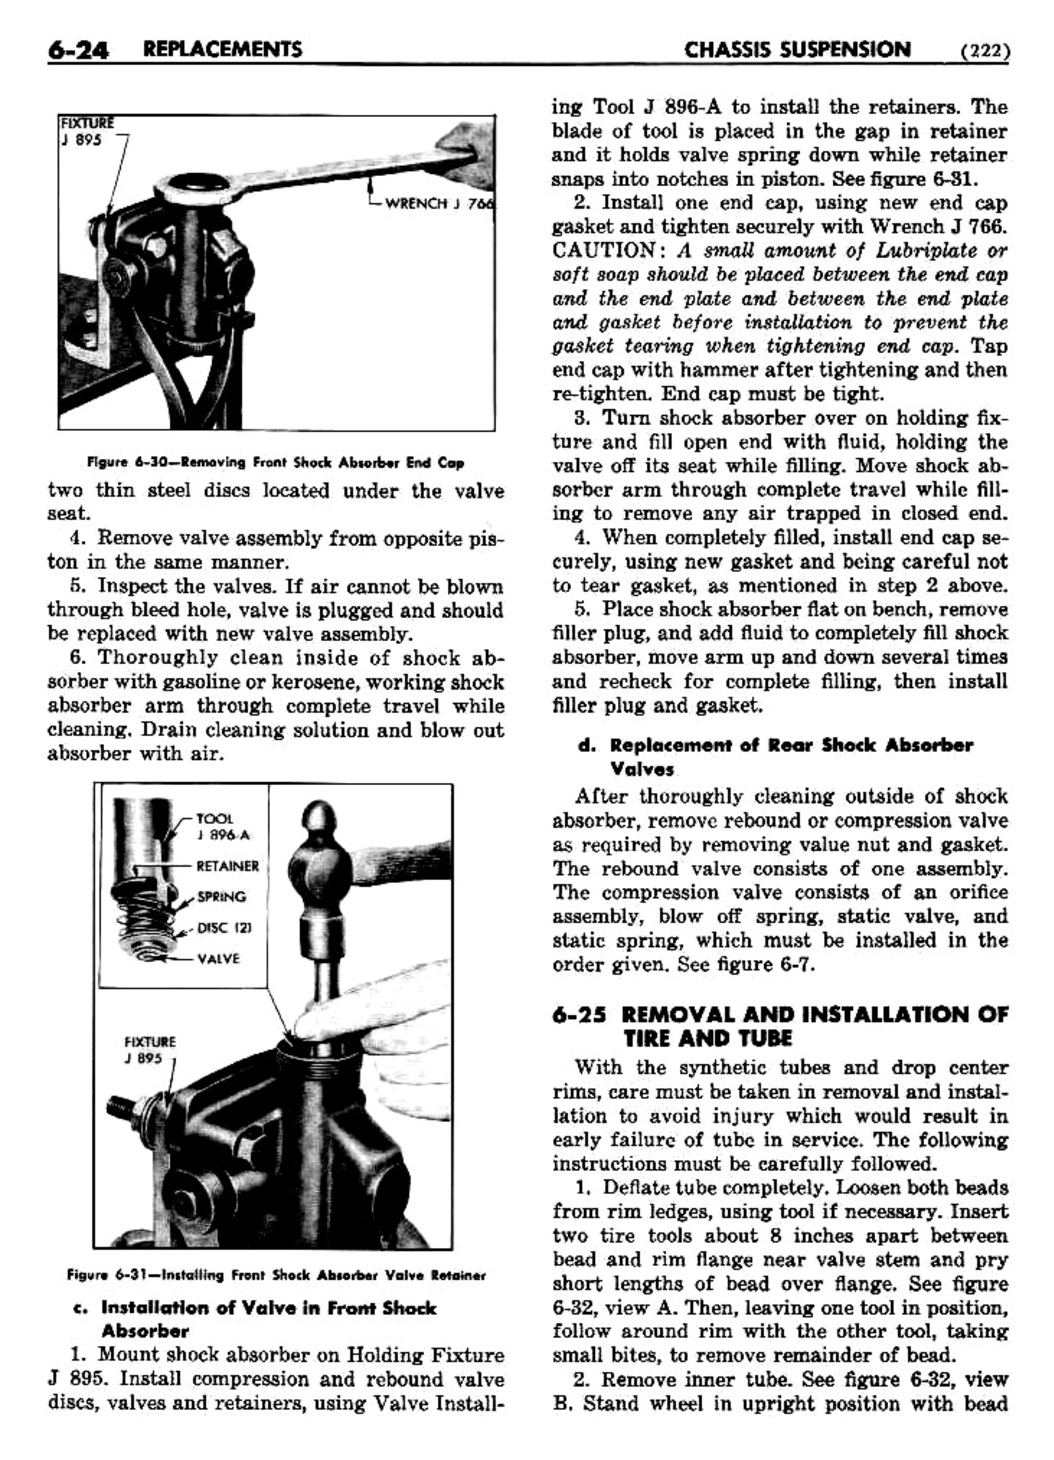 n_07 1948 Buick Shop Manual - Chassis Suspension-024-024.jpg